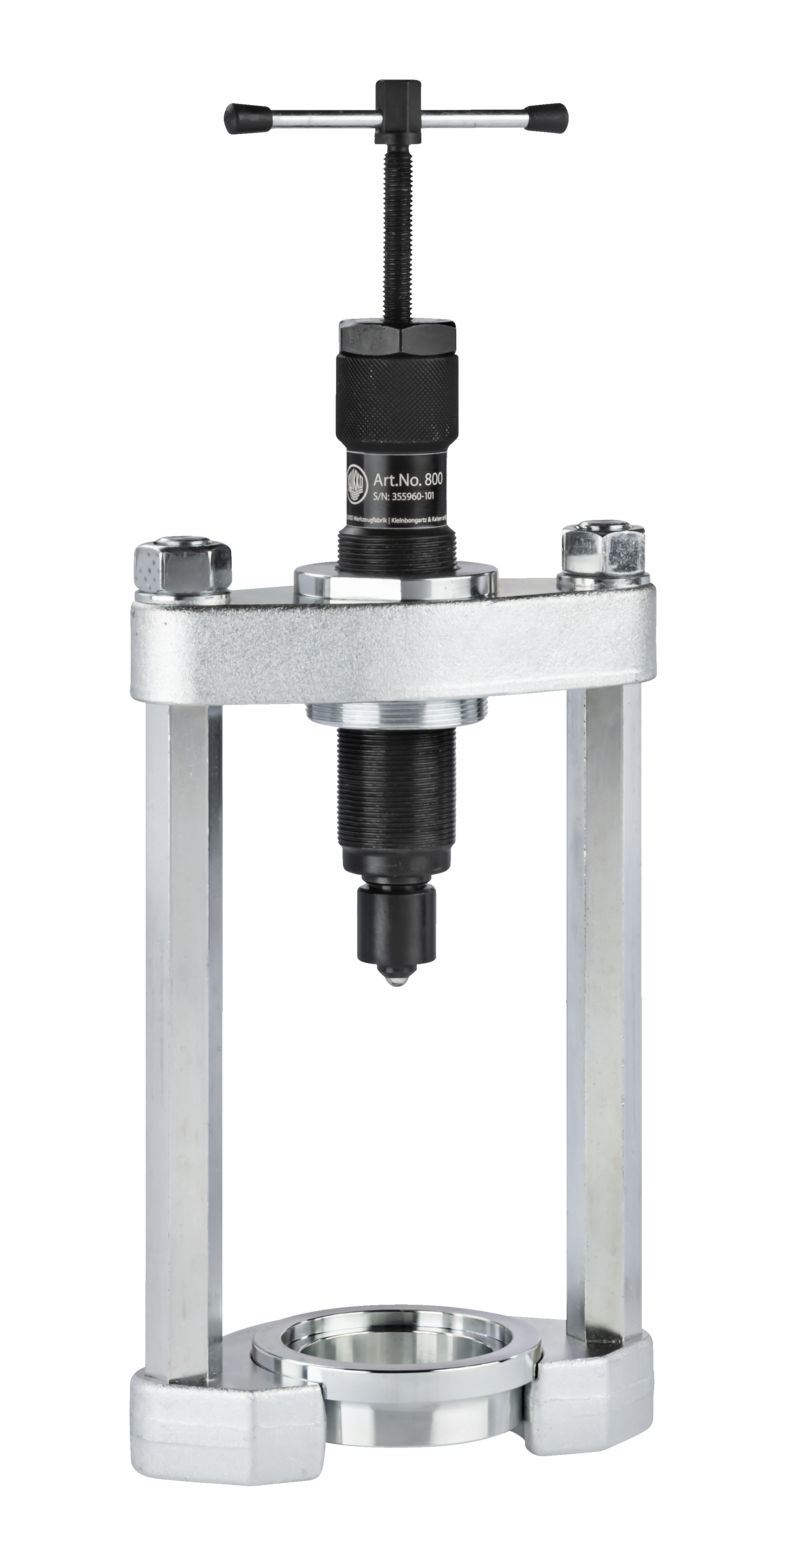 A universal press frame for silent bushings of the 880 series for bearing replacement without dismounting the axle